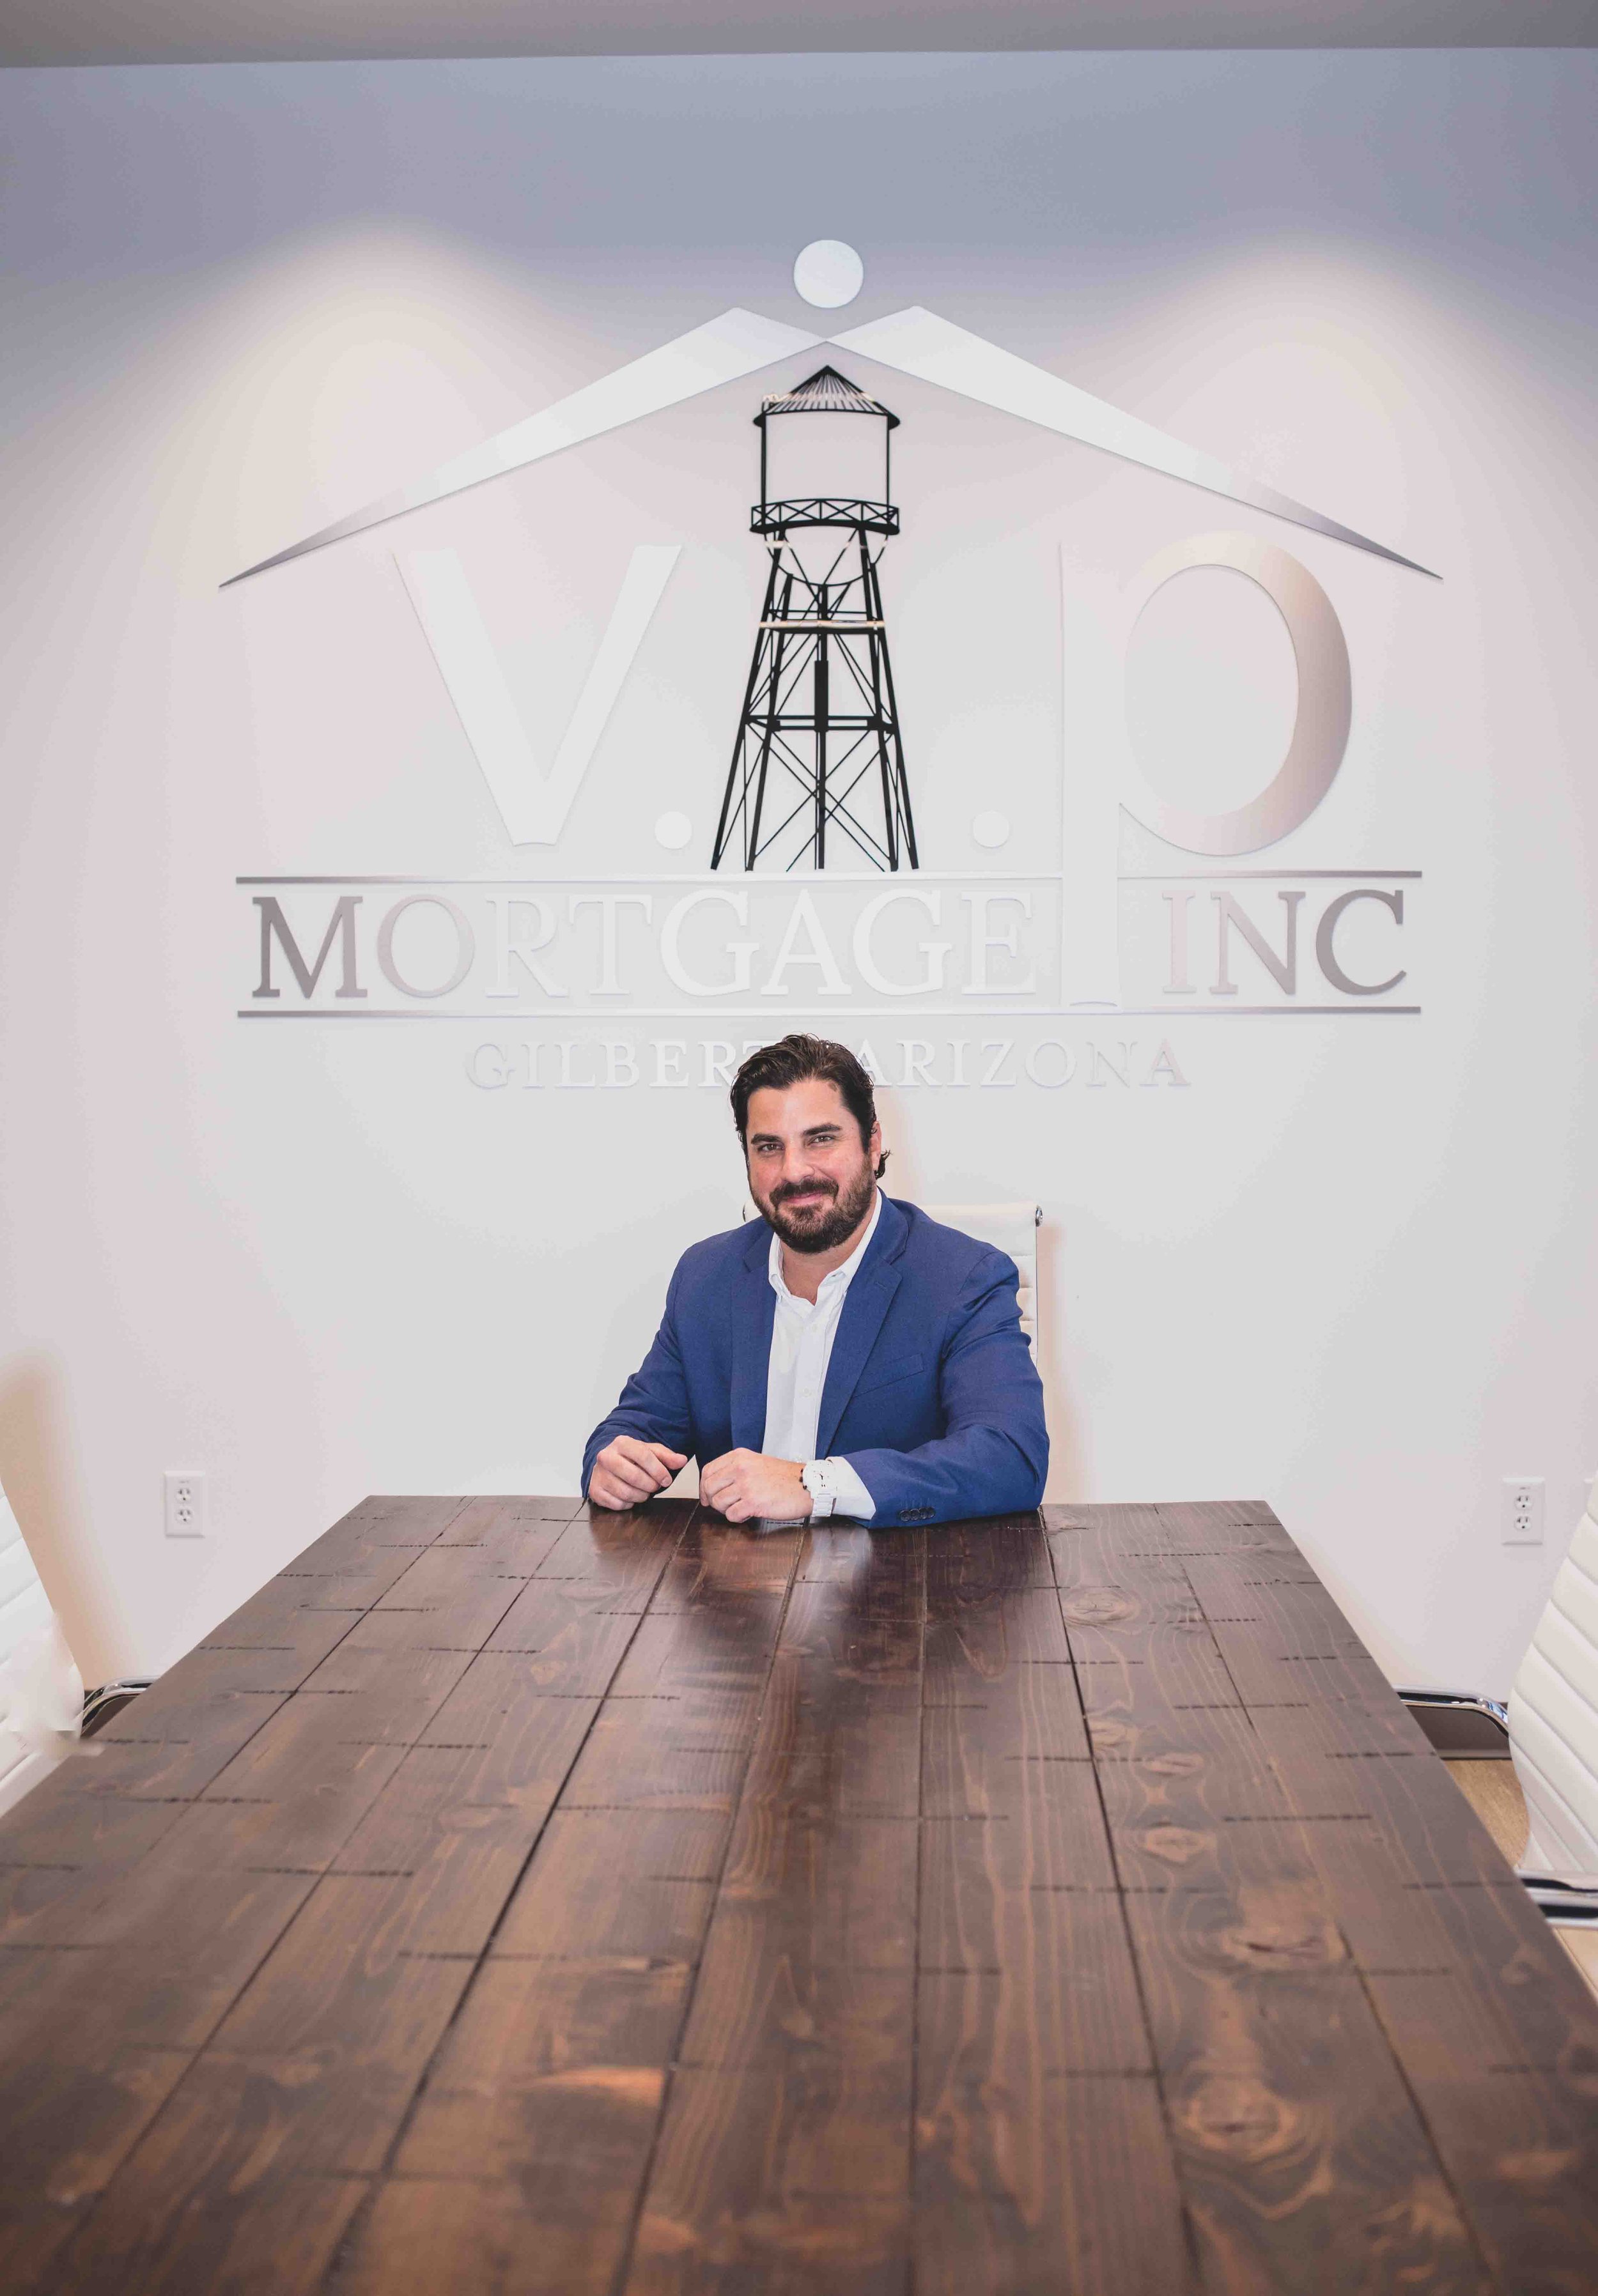 Man poses in VIP Mortgage office suites for professional headshots by best branding photographer in Phoenix, Arizona; Jennifer Lind Schutsky.